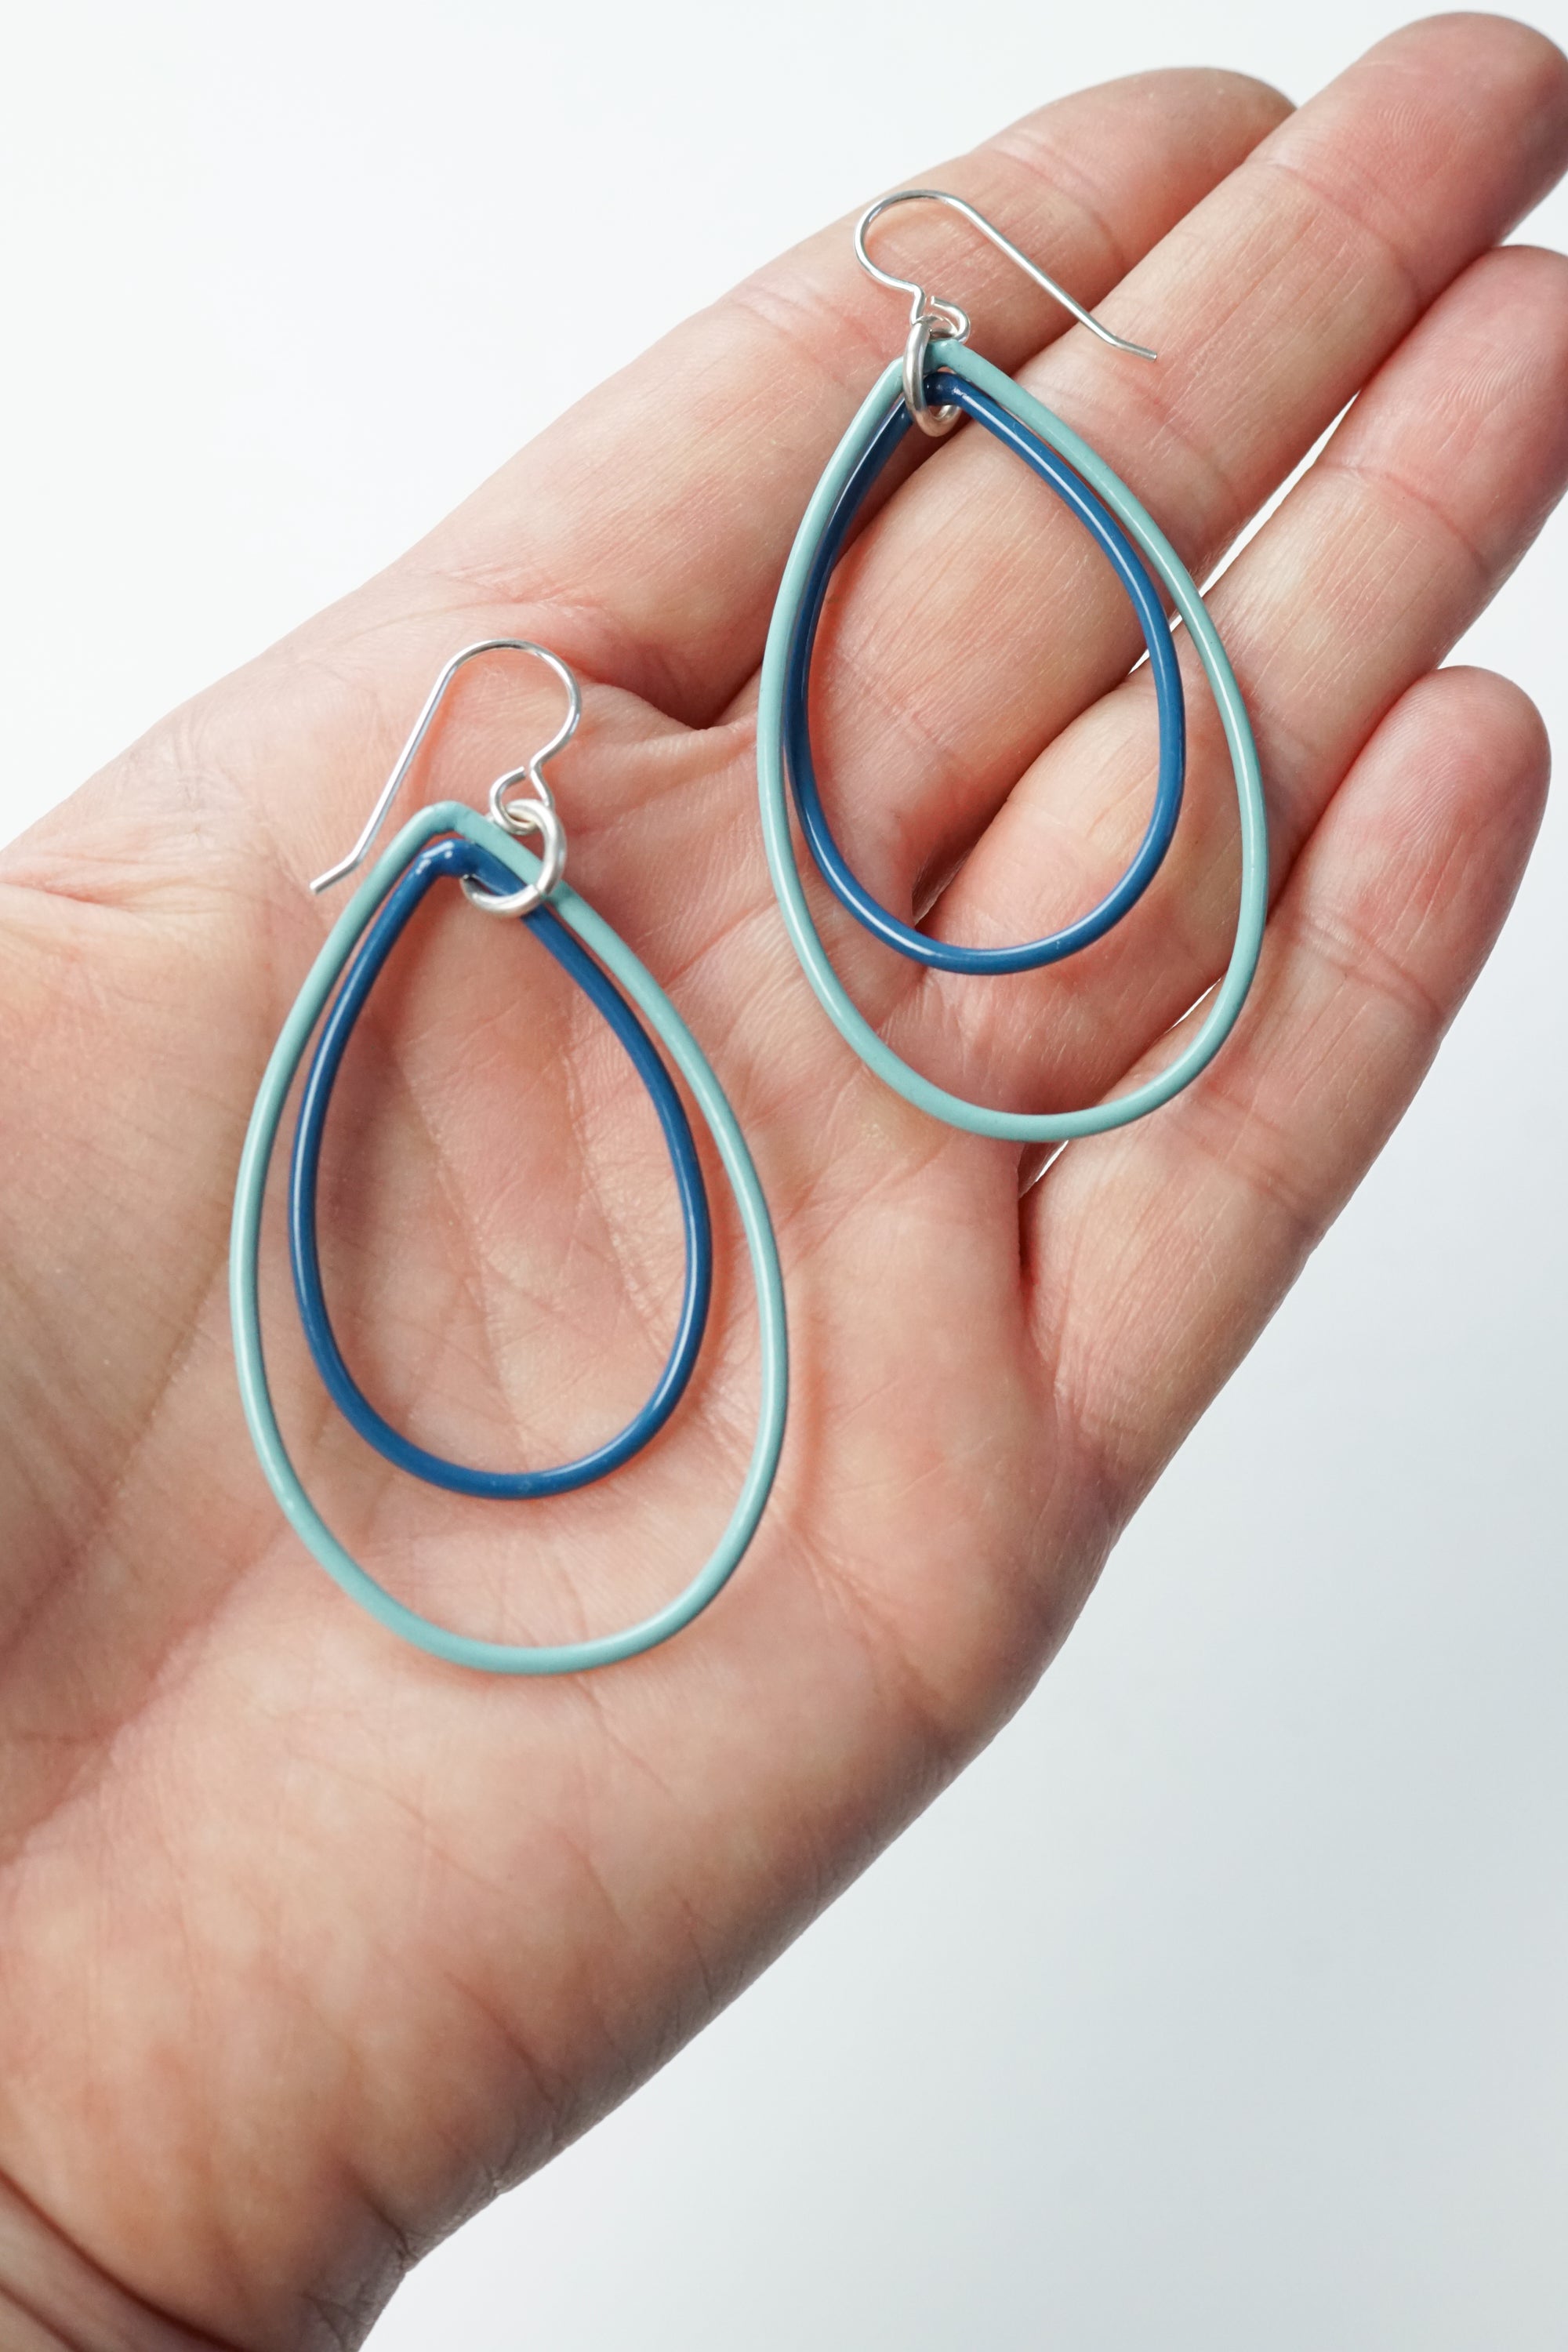 Eva earrings in Faded Teal and Azure Blue